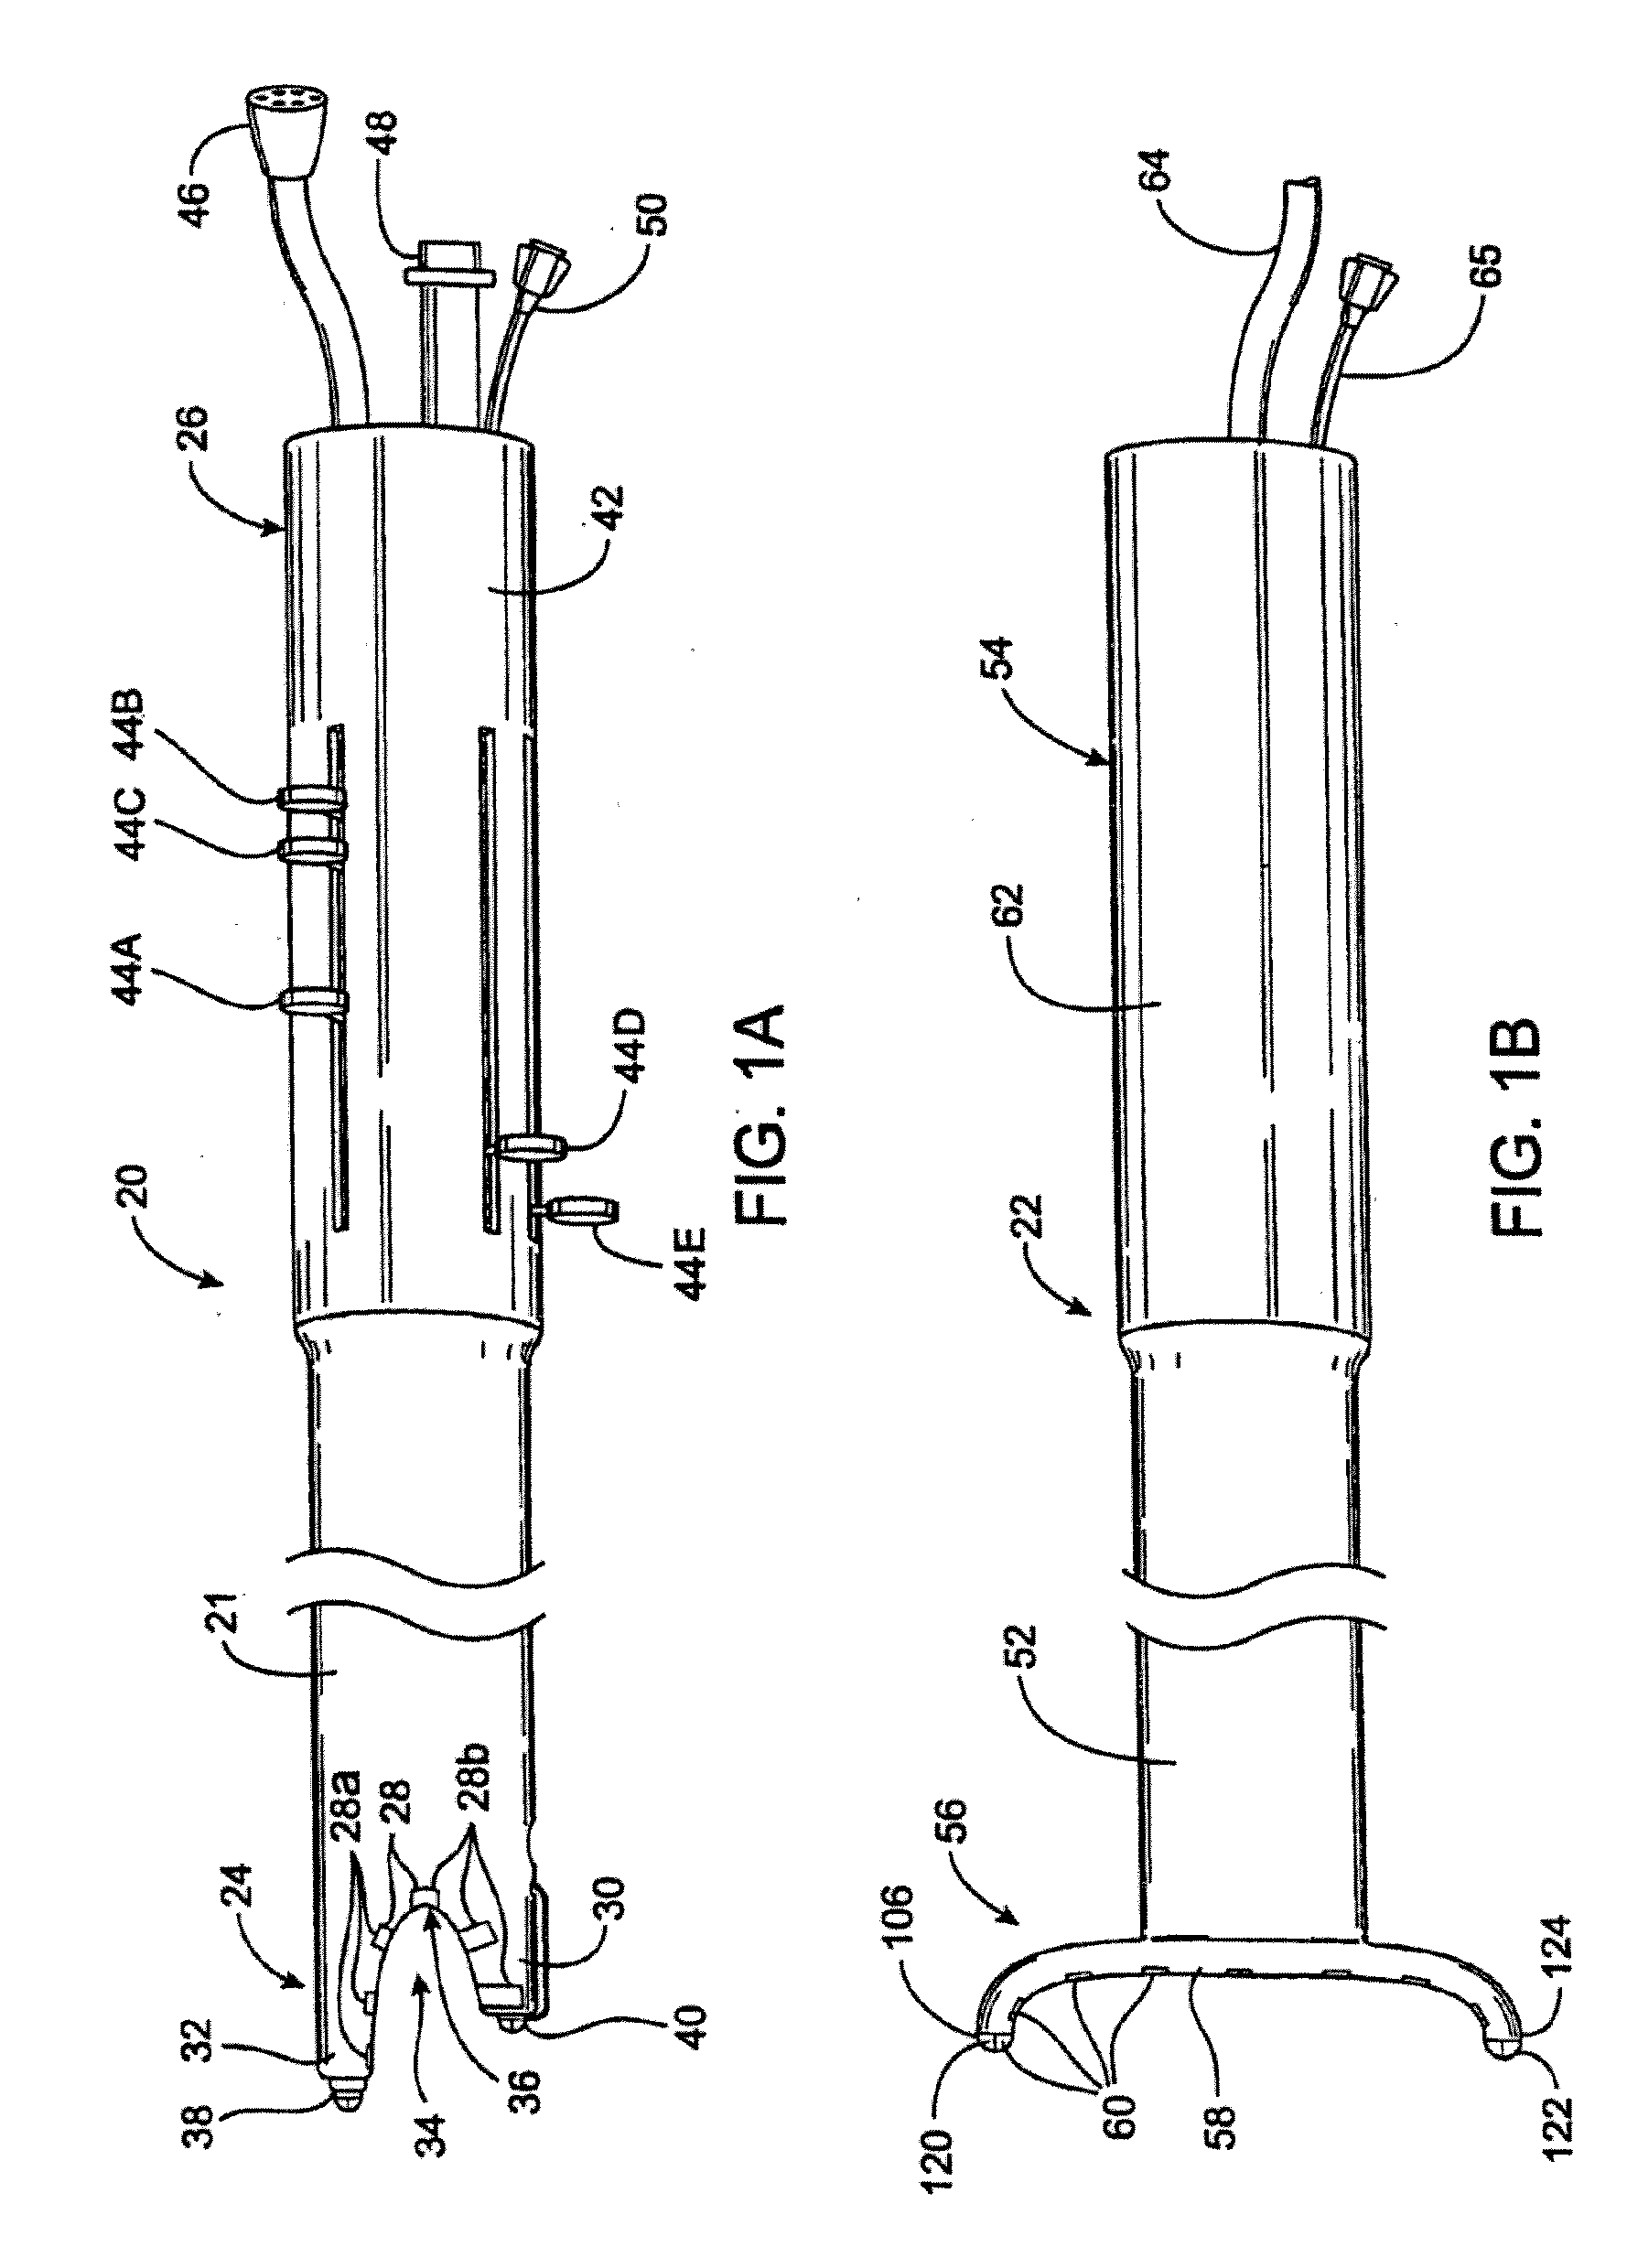 Devices and methods for ablating cardiac tissue